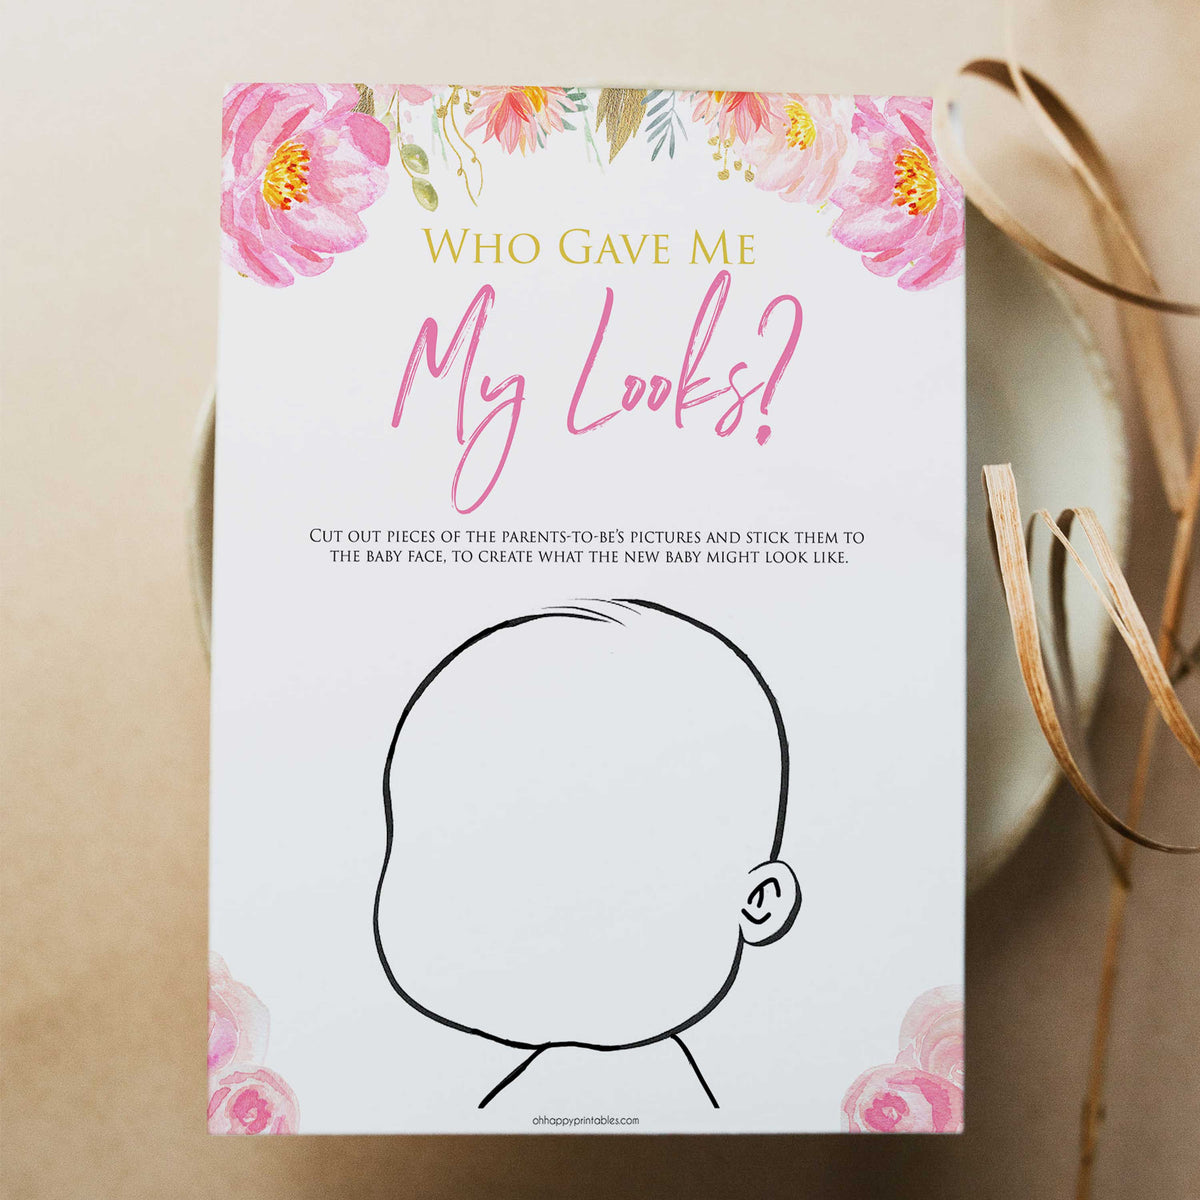 Pink blush floral baby shower what am I game, printable baby games, baby shower games, blush baby shower, floral baby games, girl baby shower ideas, pink baby shower ideas, floral baby games, popular baby games, fun baby games